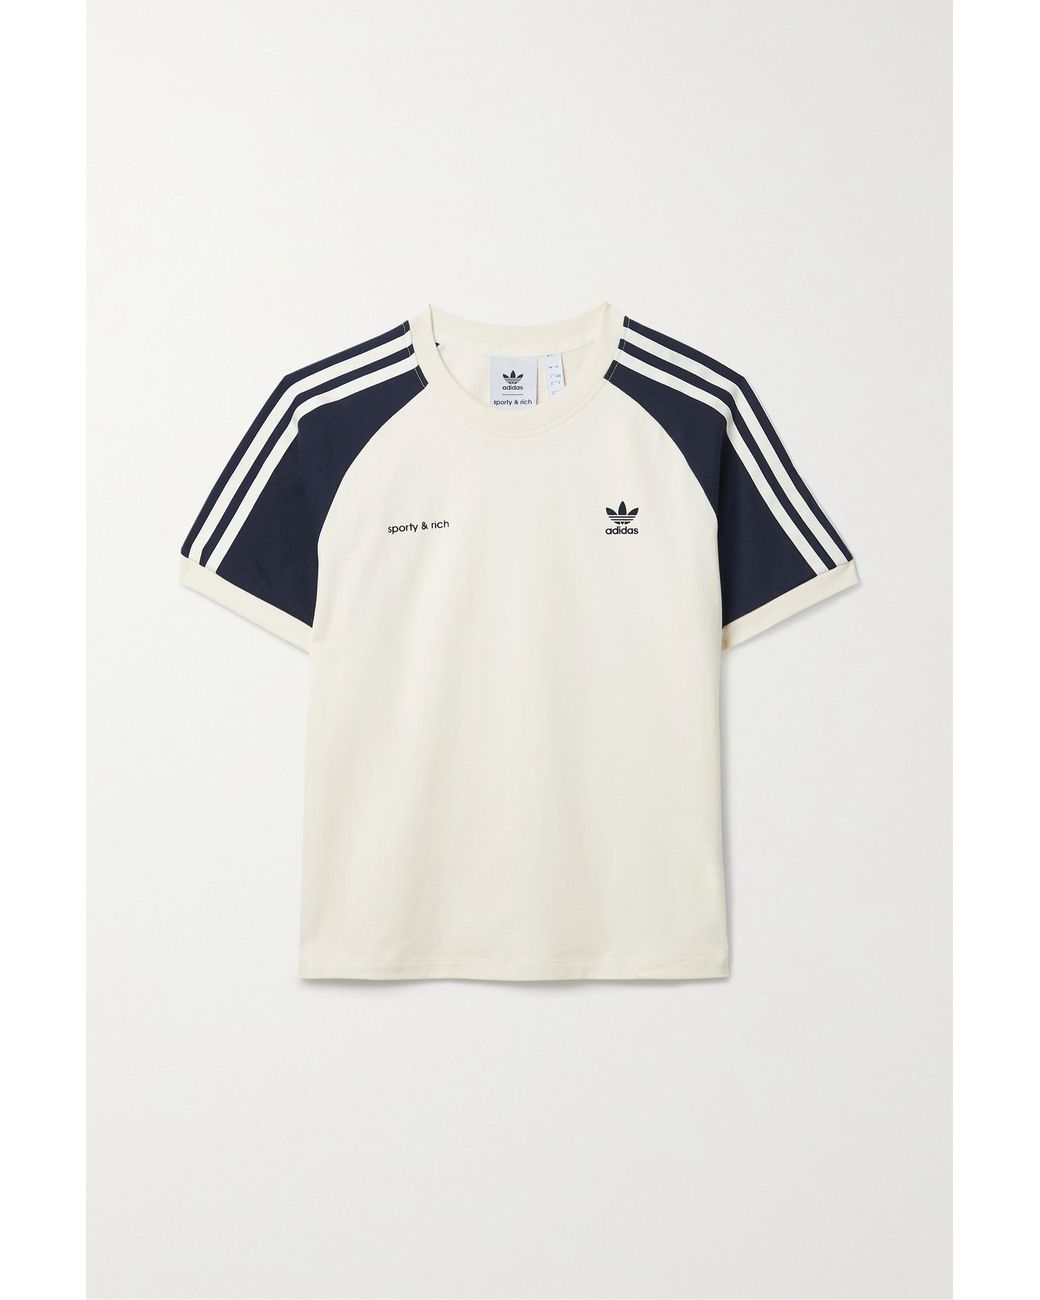 Adidas Originals + Sporty & Rich Two-Tone Cotton-Jersey T-Shirt In Natural  | Lyst Uk